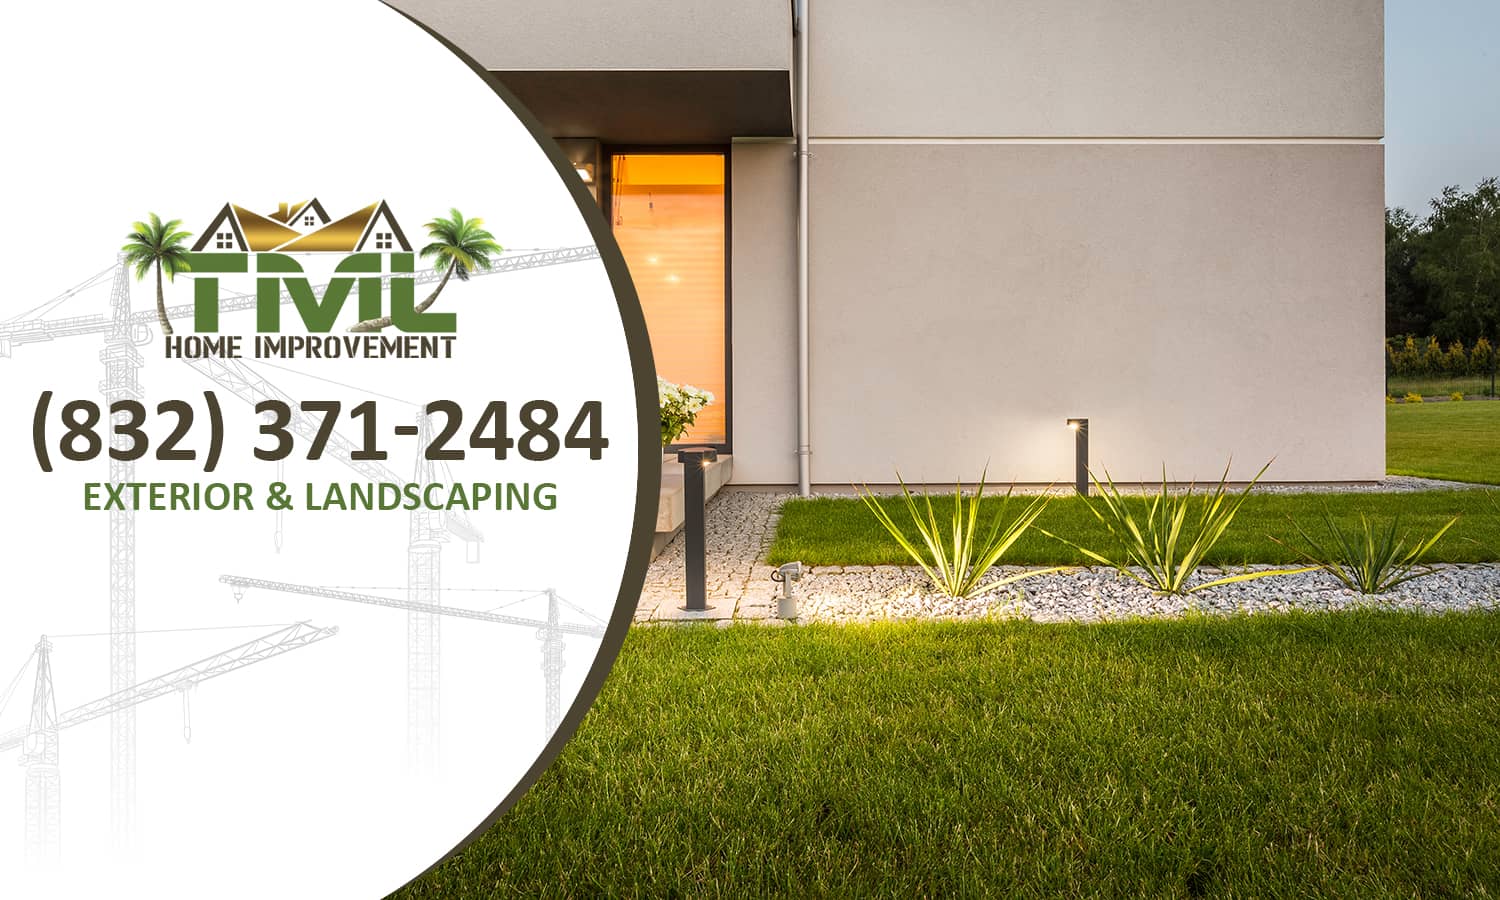 Exterior and Landscaping Houston